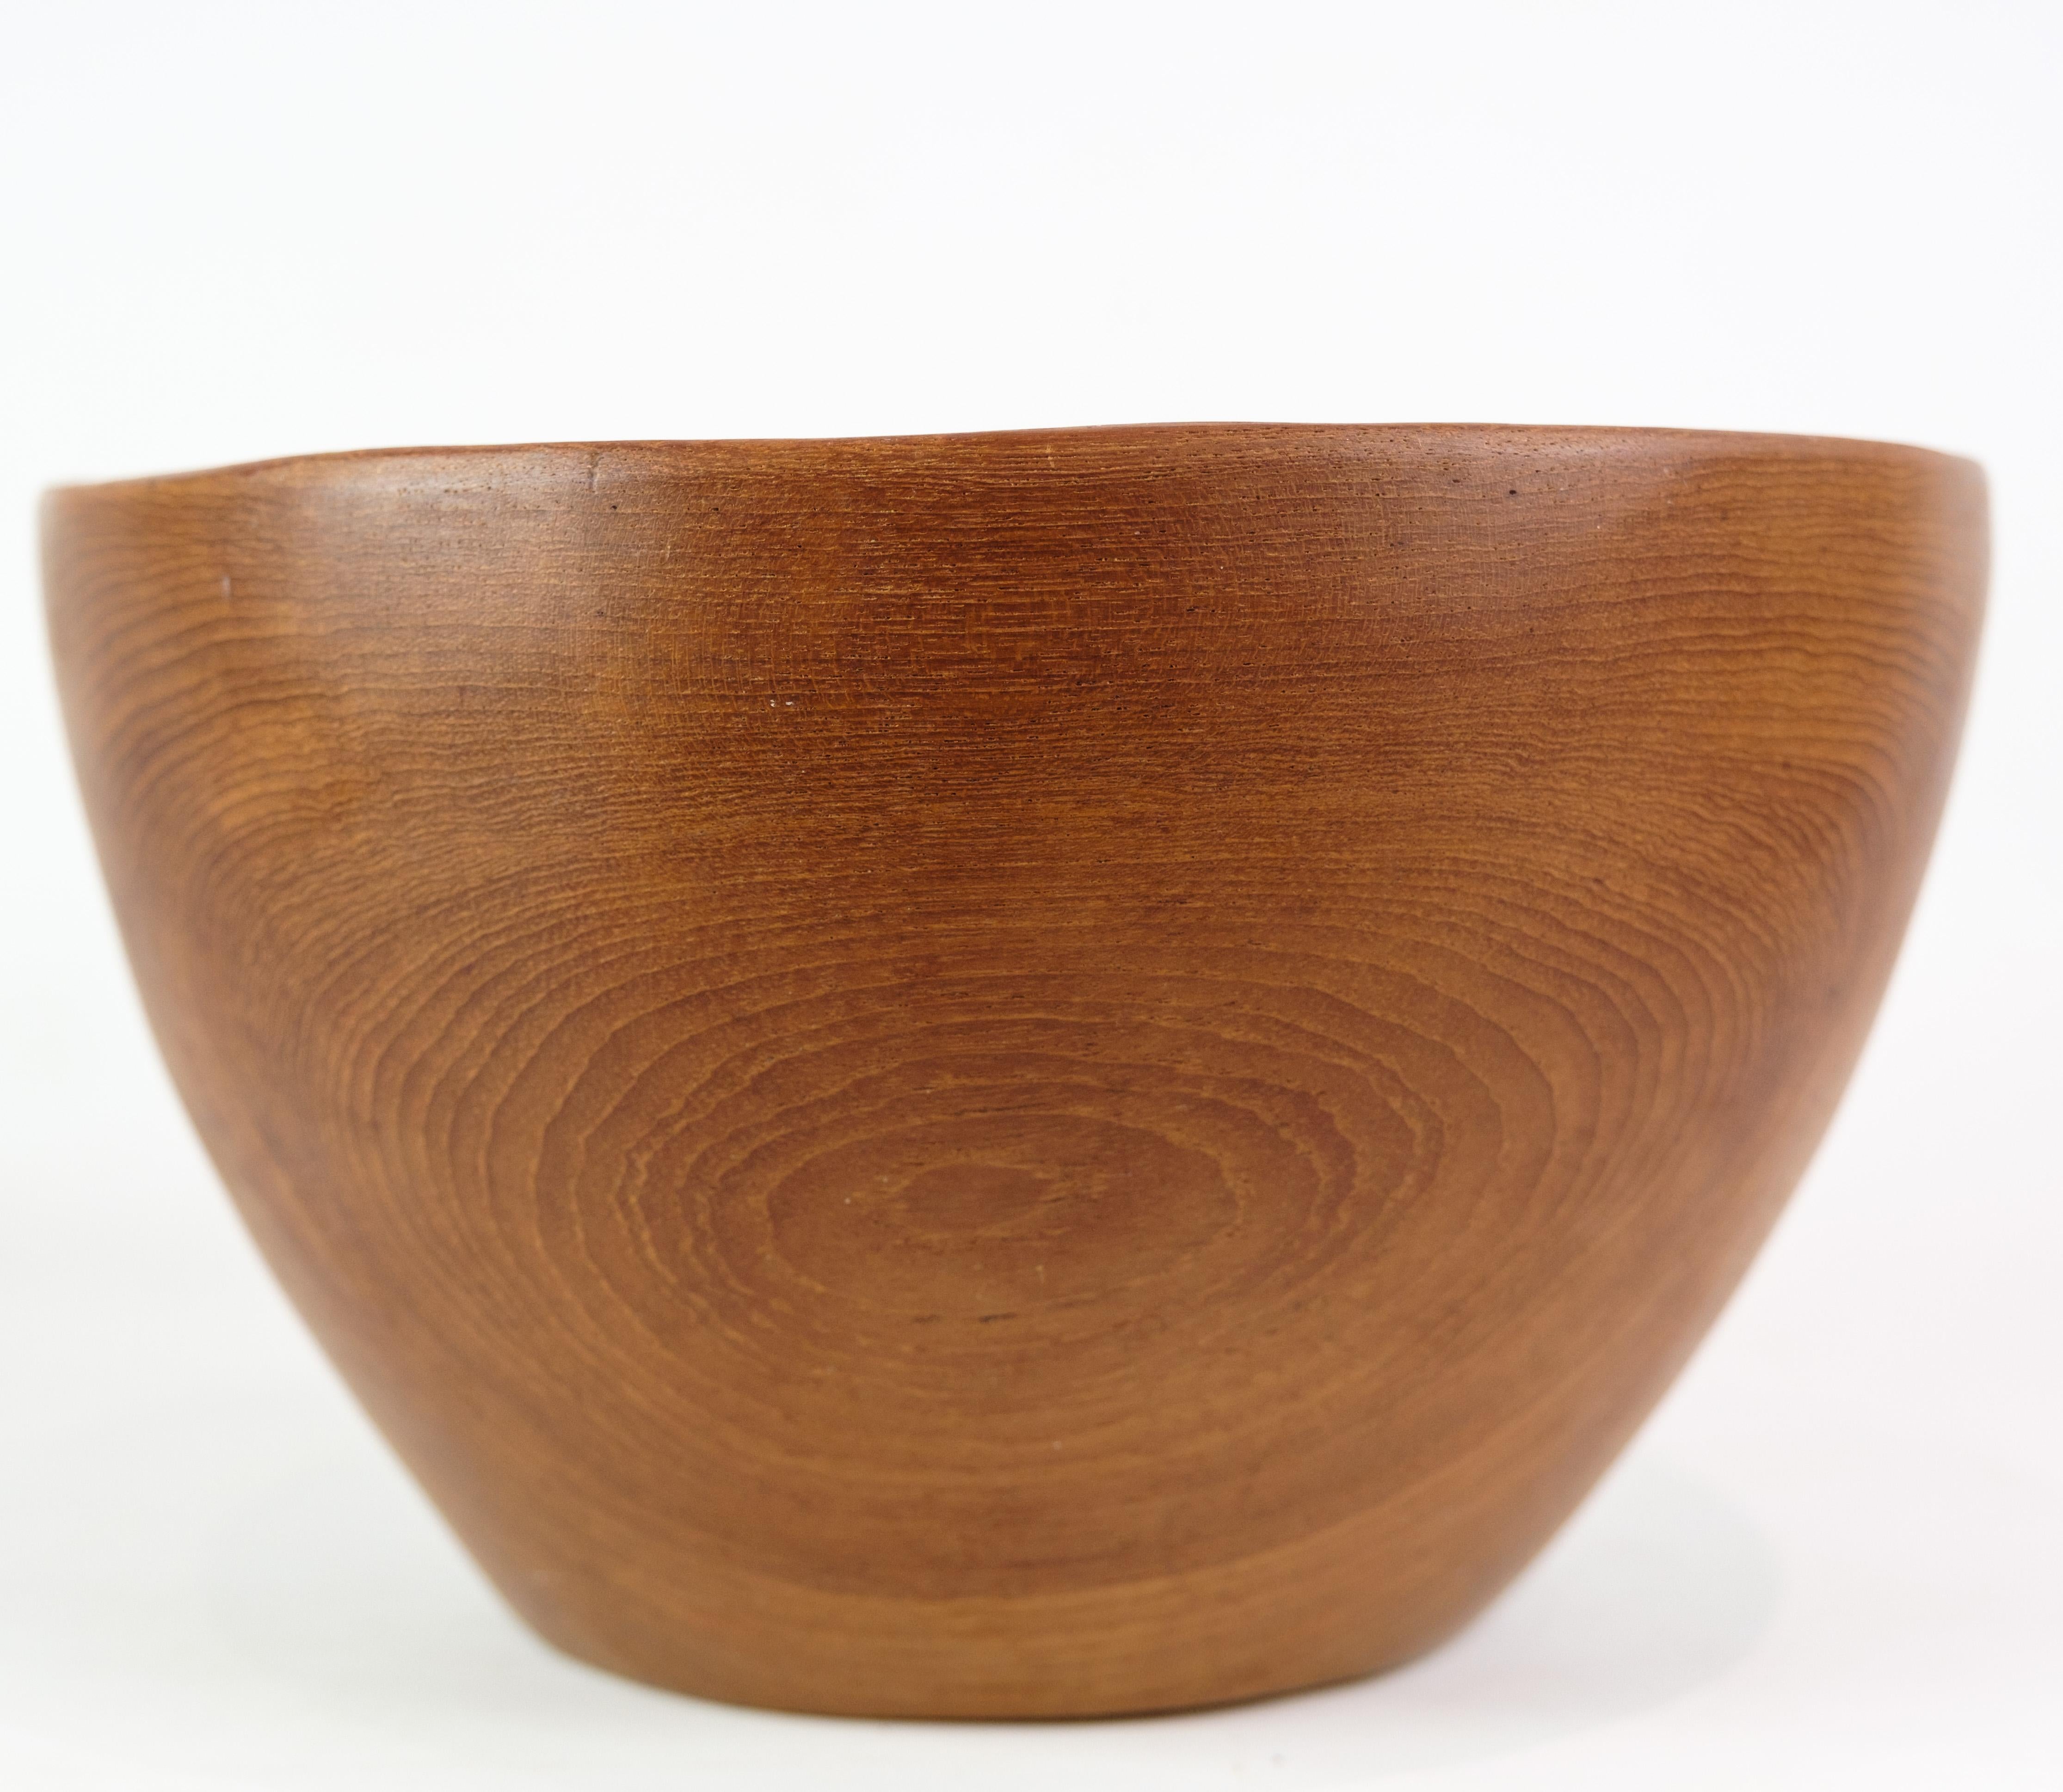 Bowl Made In Teak, Danish Design From 1960s For Sale 2